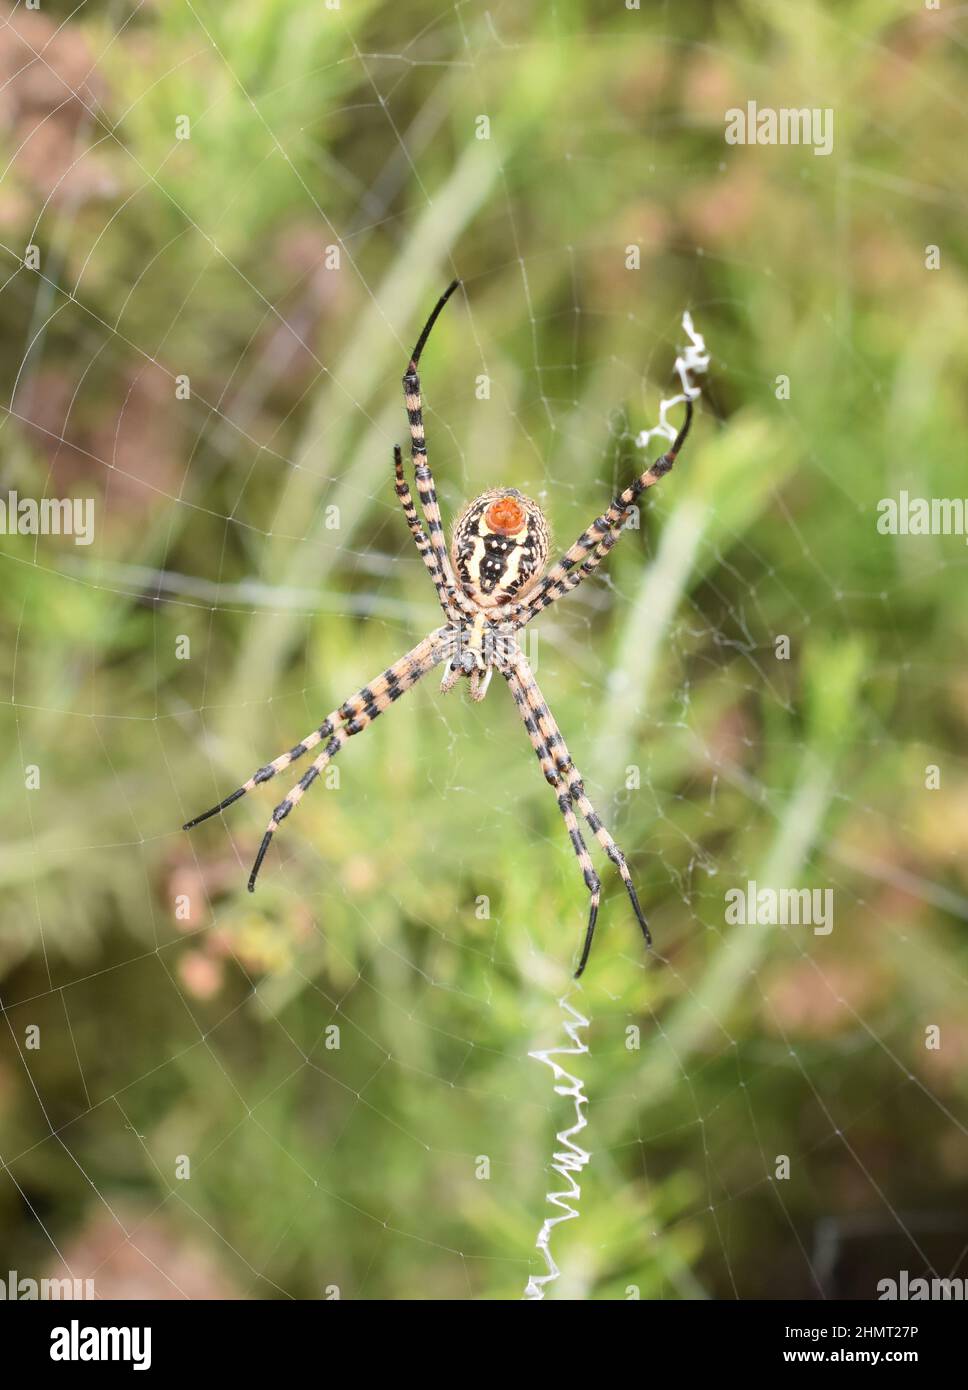 Banded garden spider Argiope trifasciata orbweaver in web showing spinning gland Stock Photo